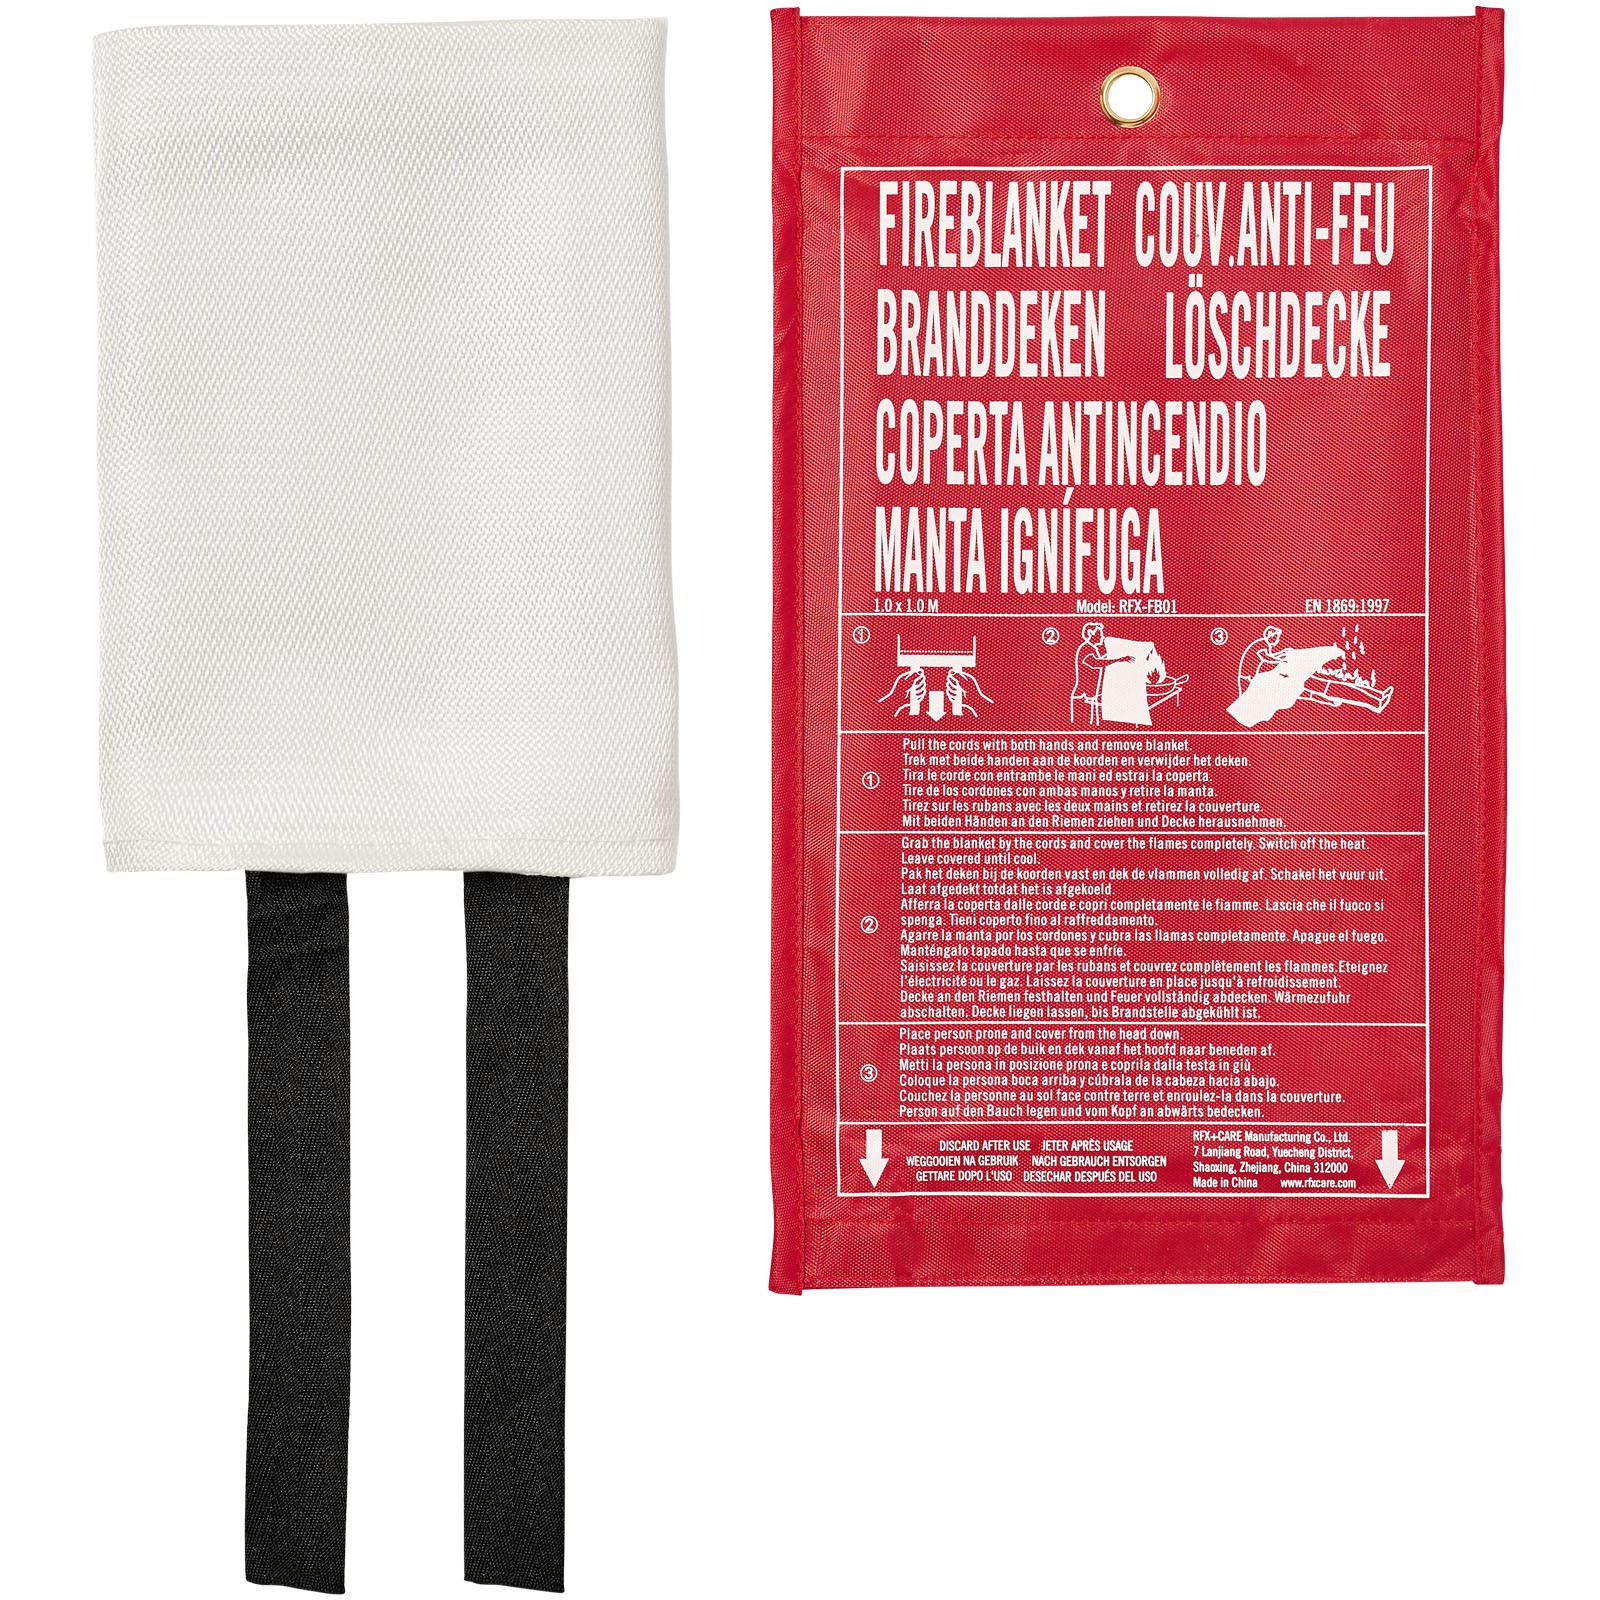 Advertising First Aid Kits - Margrethe emergency fire blanket - 3